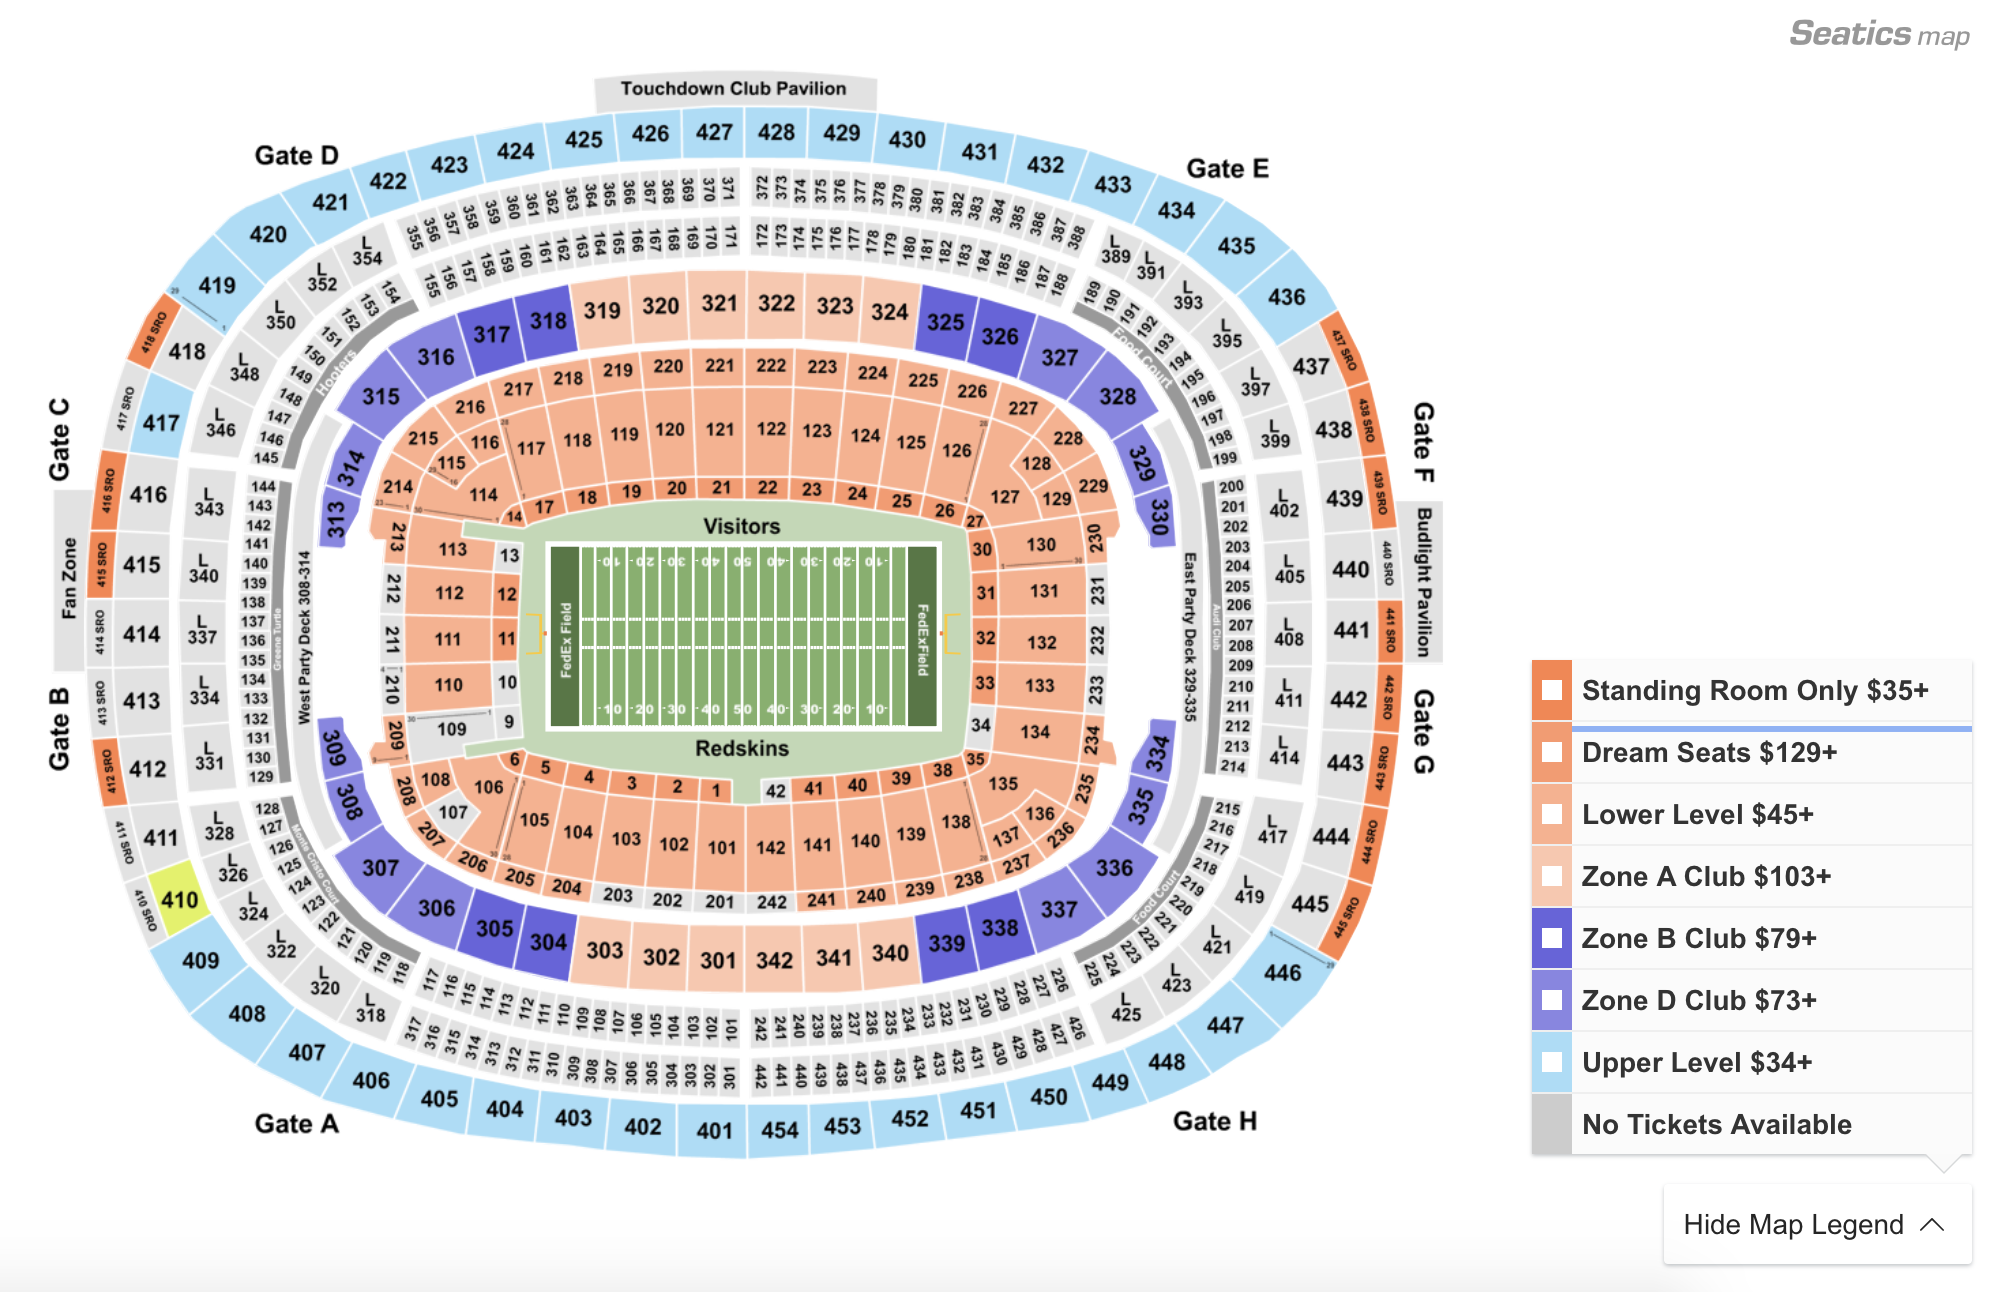 MetLife Stadium Seating Chart + Section, Row & Seat Number Info